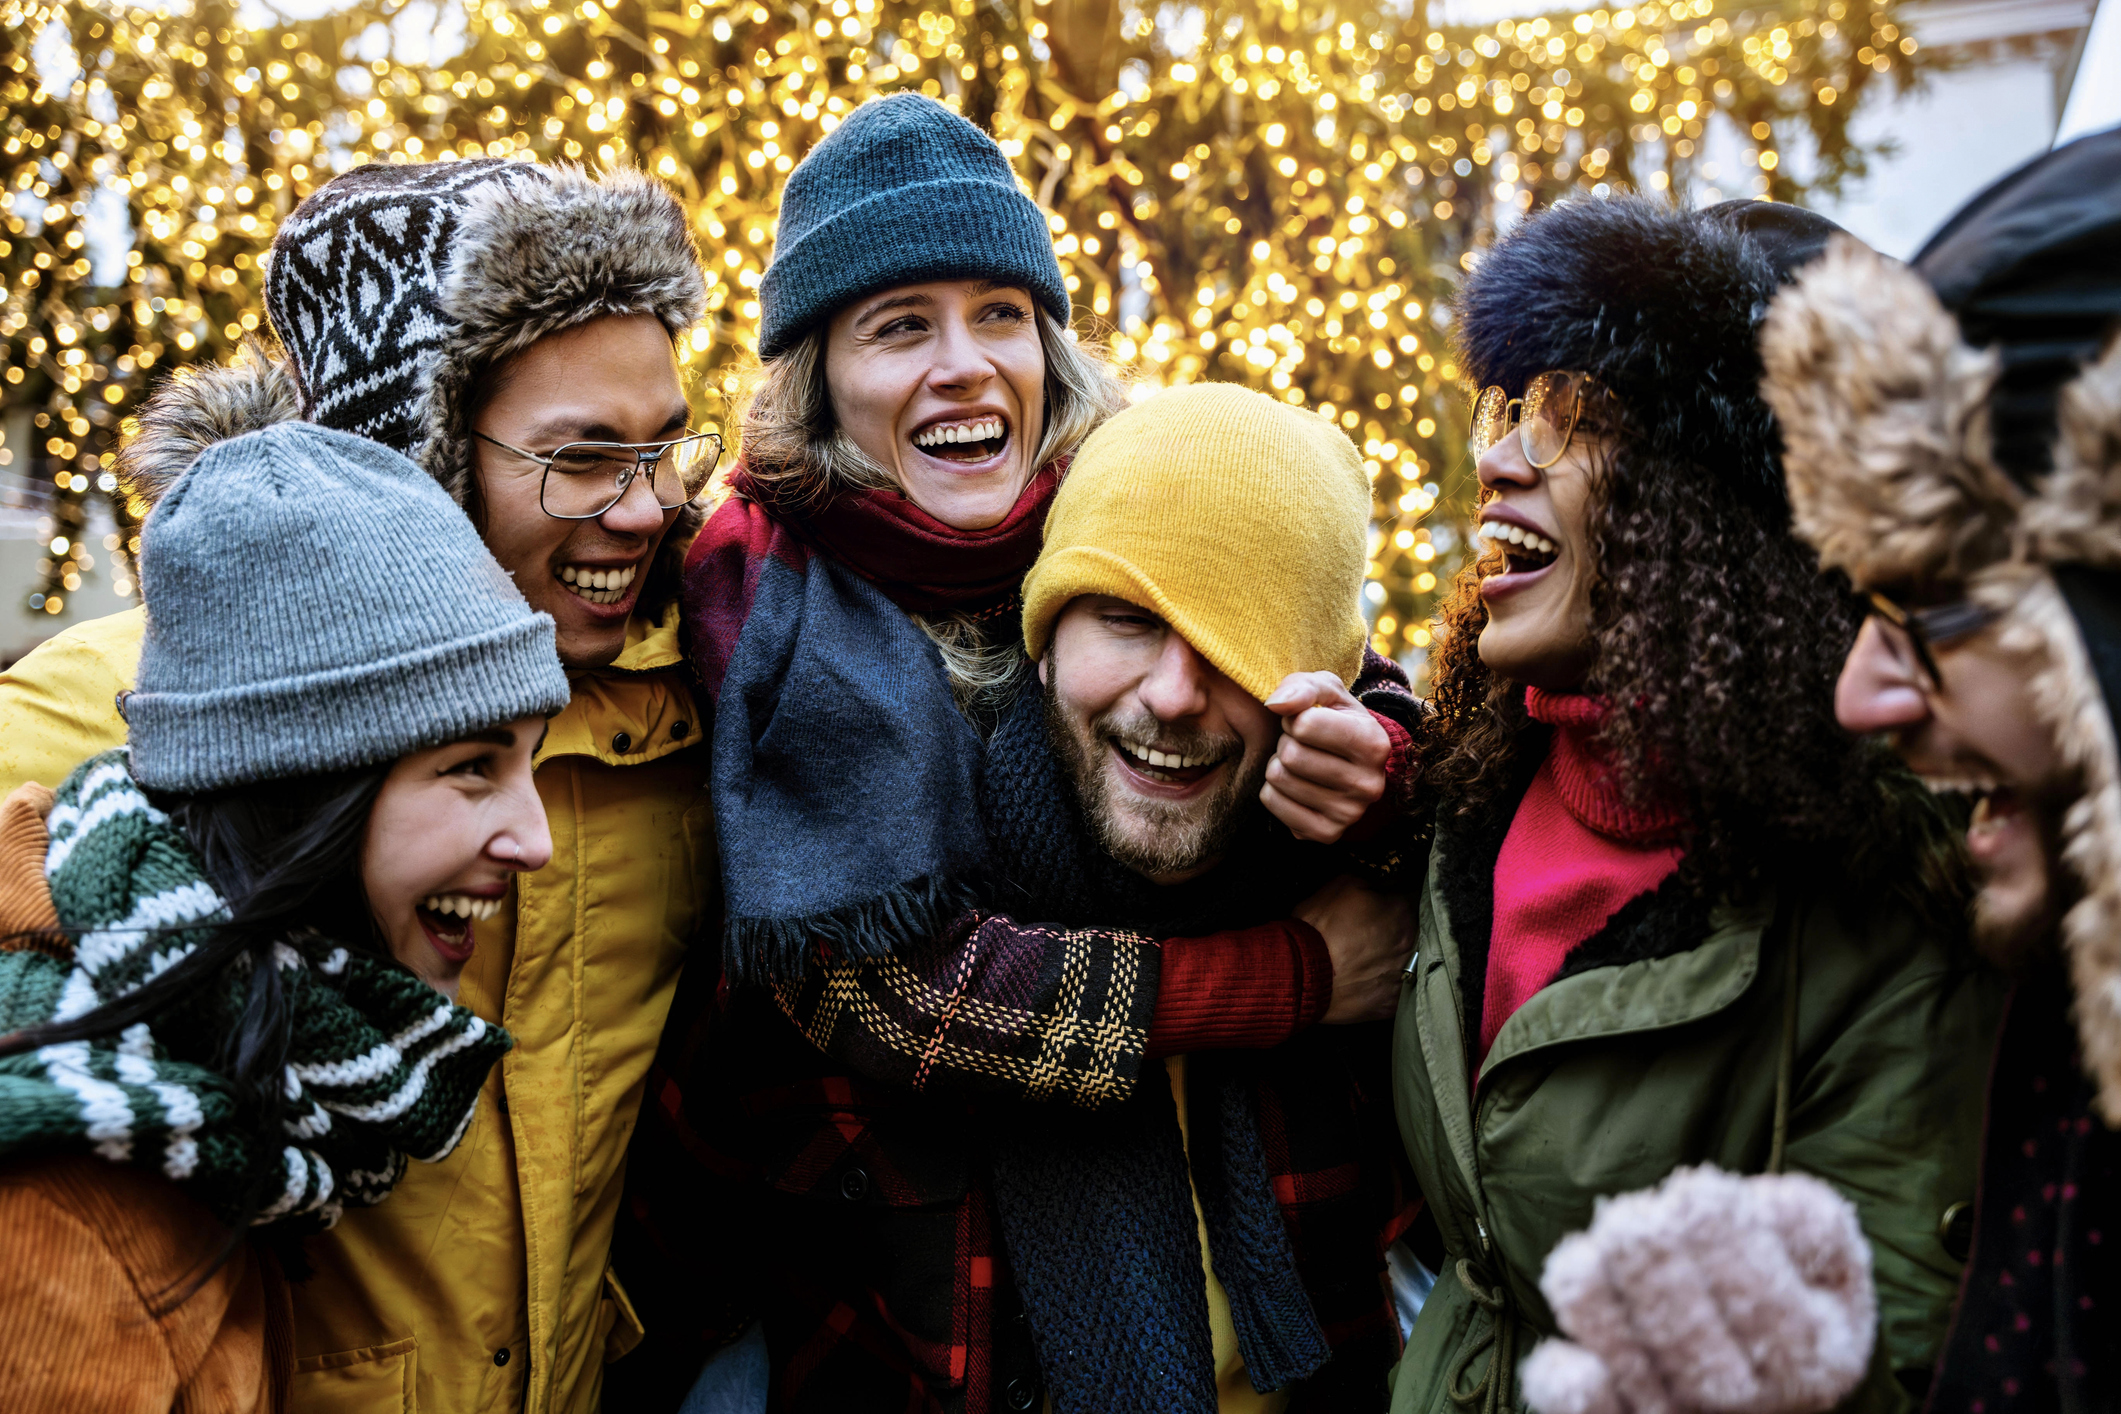 A group of friends in beanies and scarfs laughing together outside.